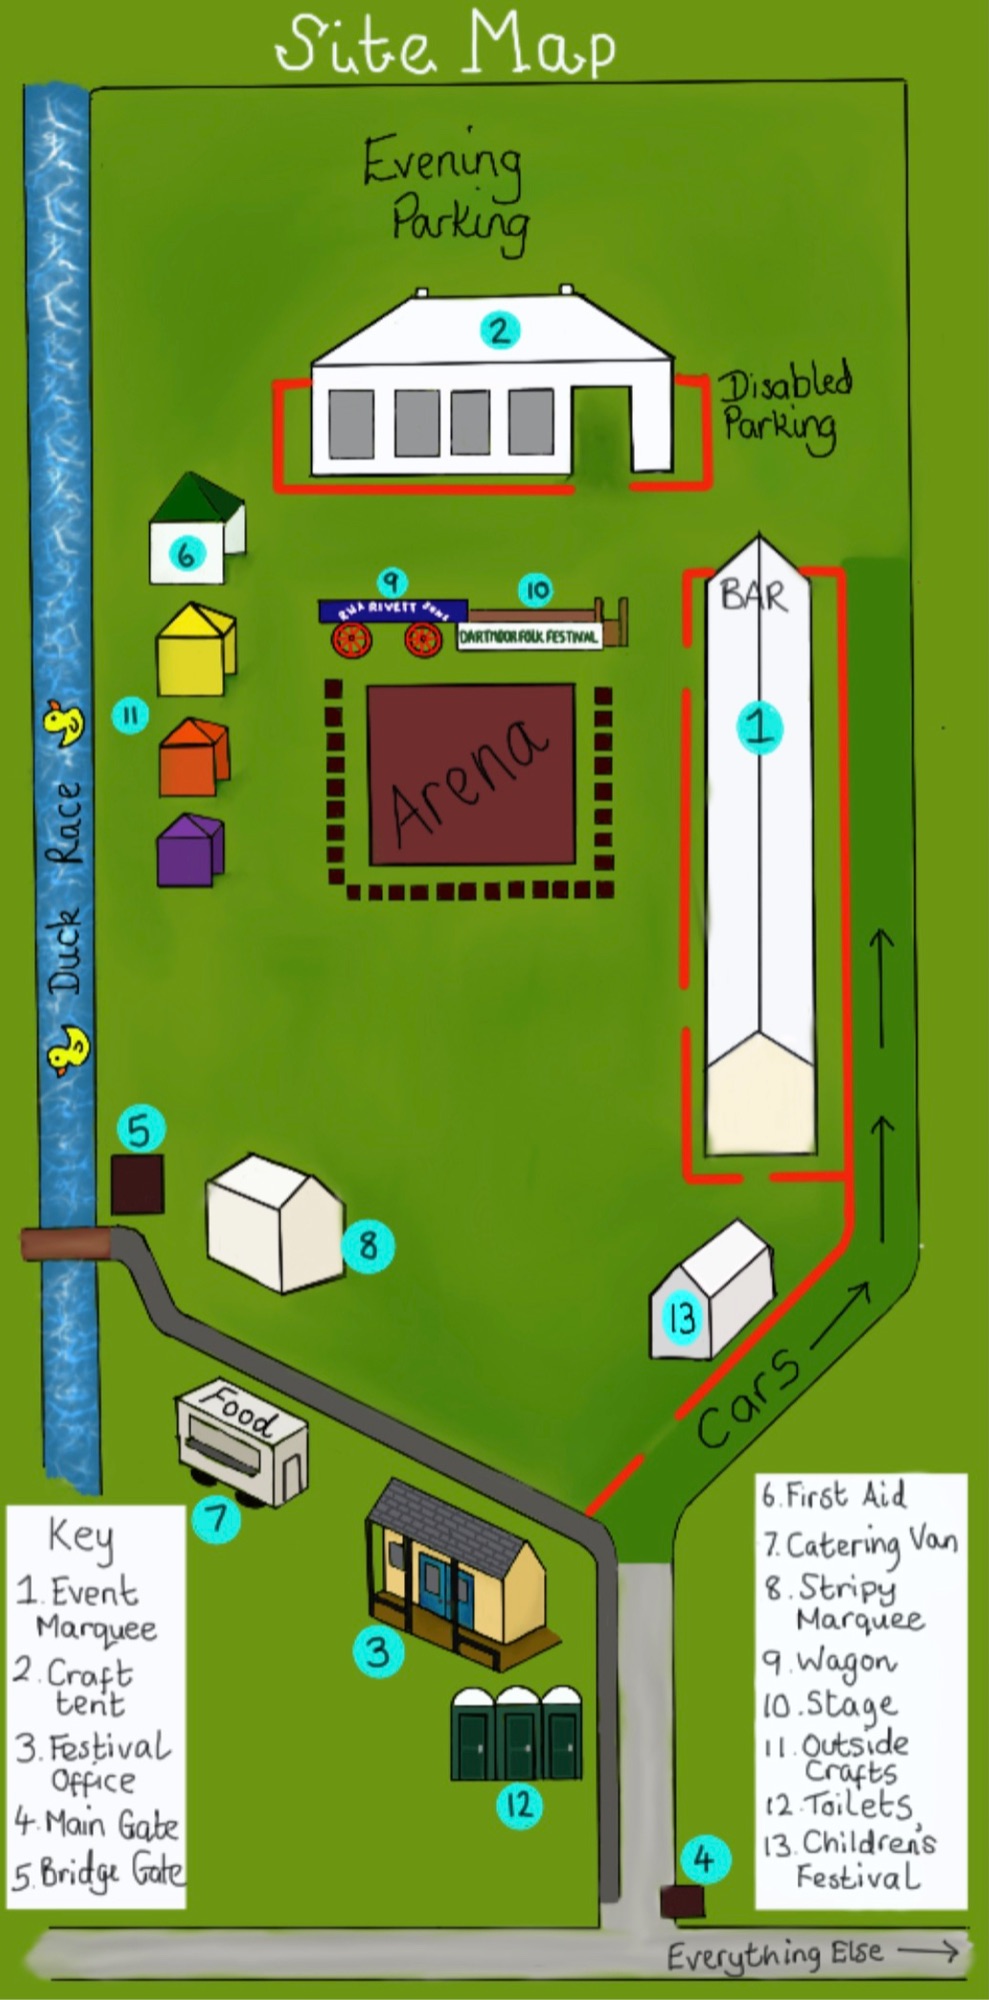 Site Map 2019